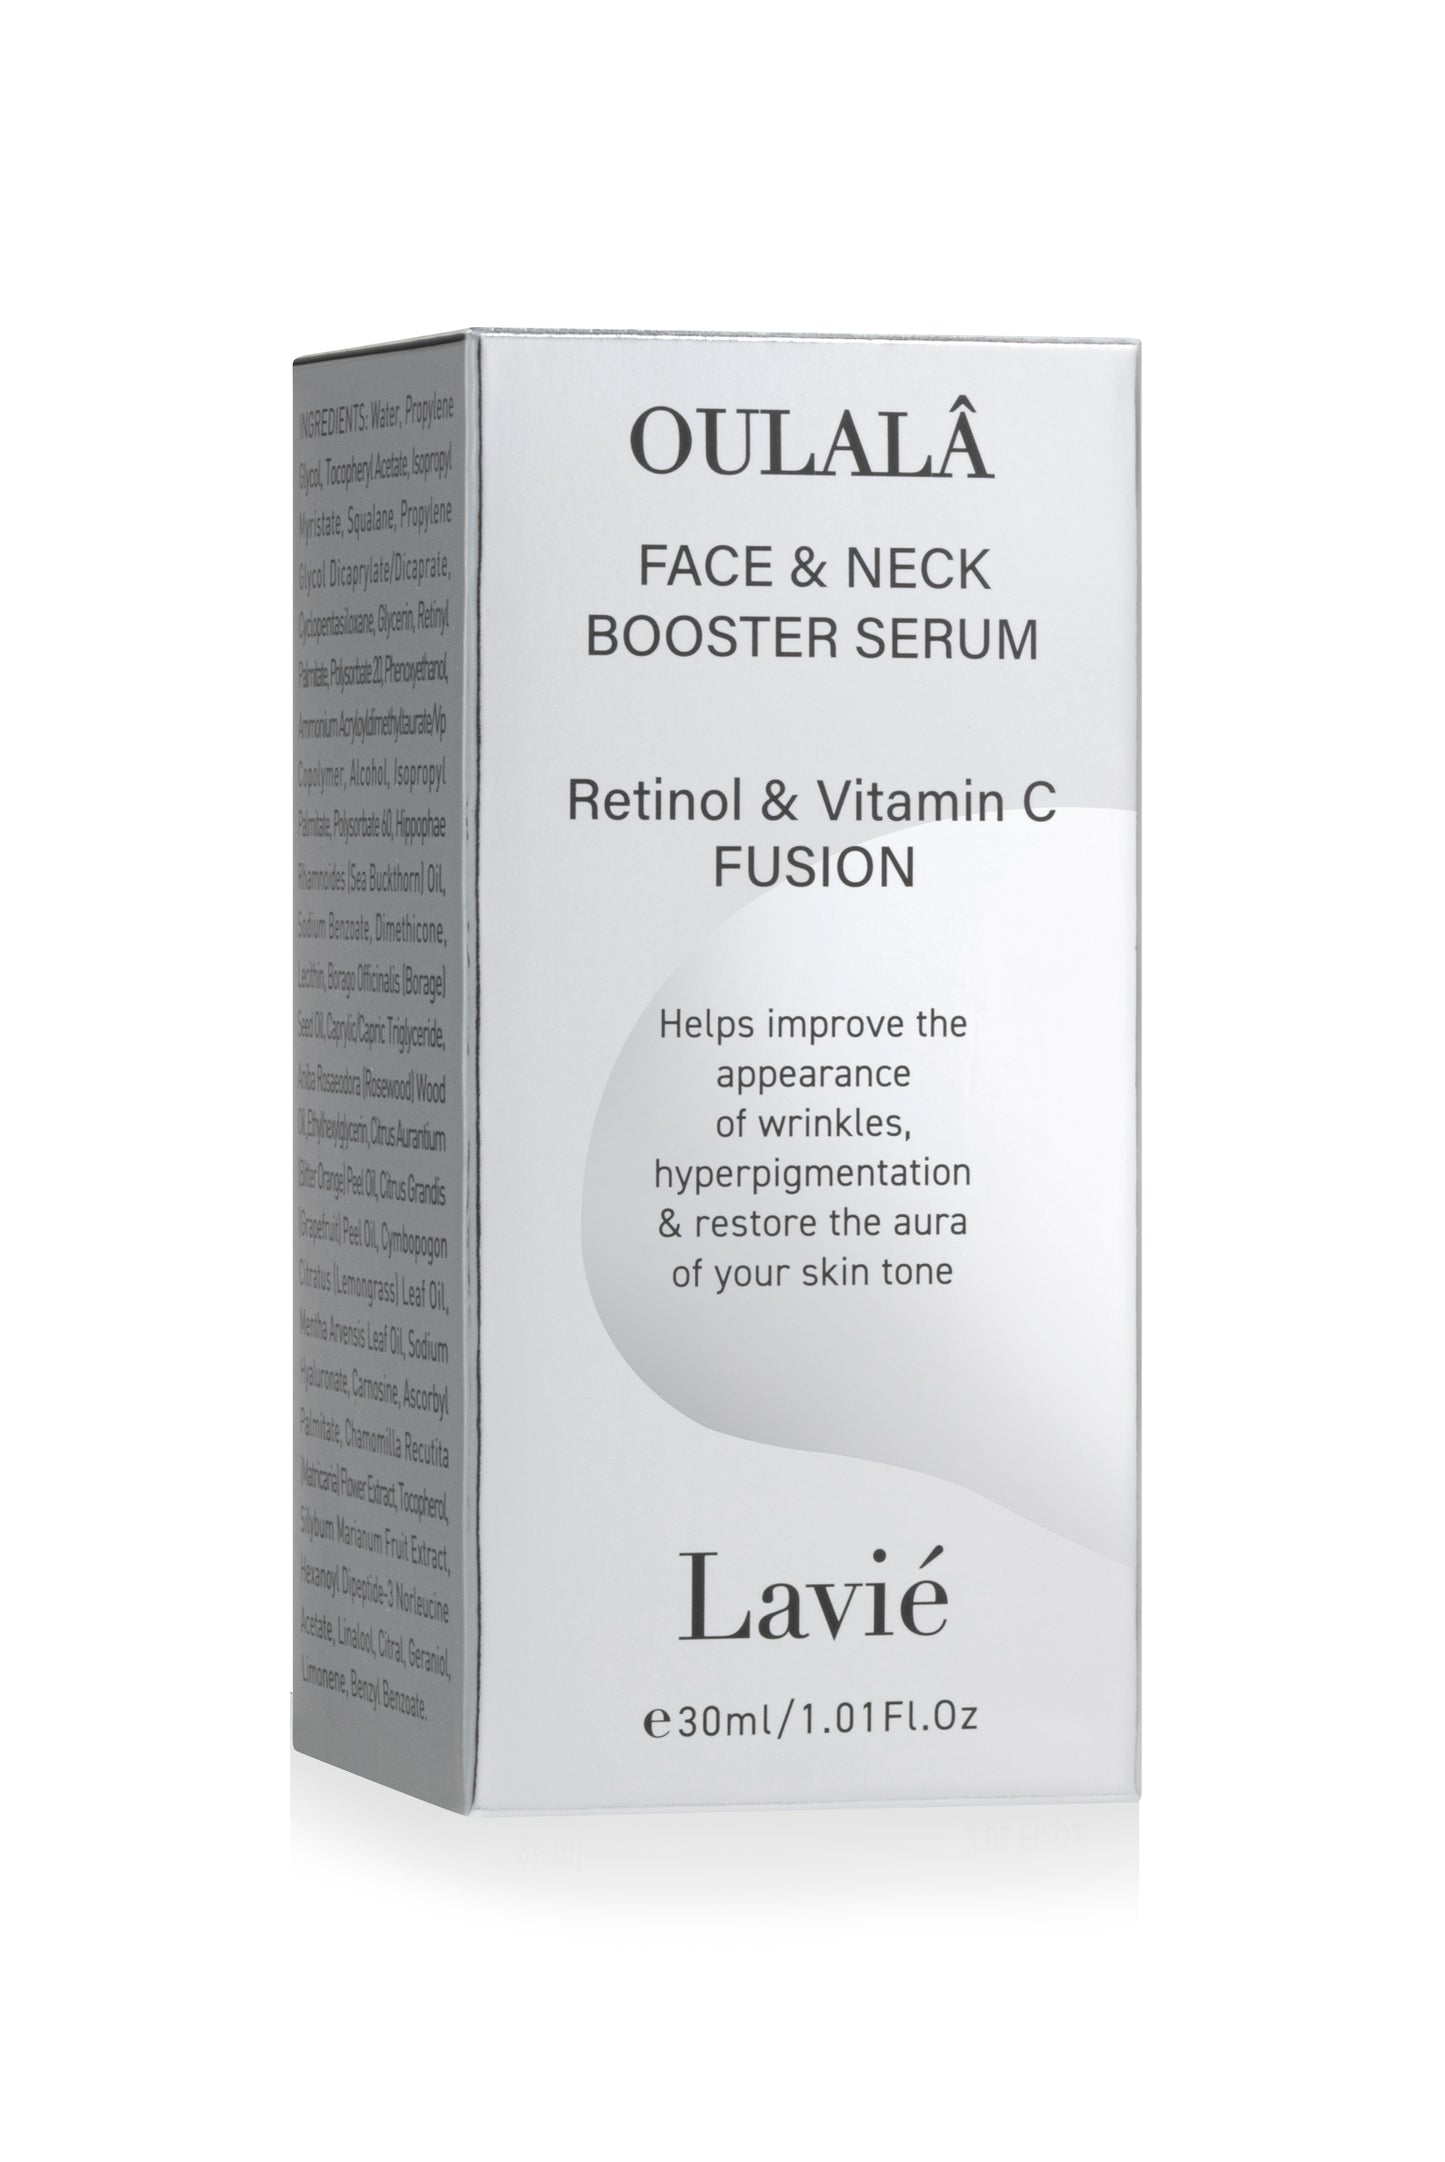 Oulala Face and Neck Booster Serum Black Bottle